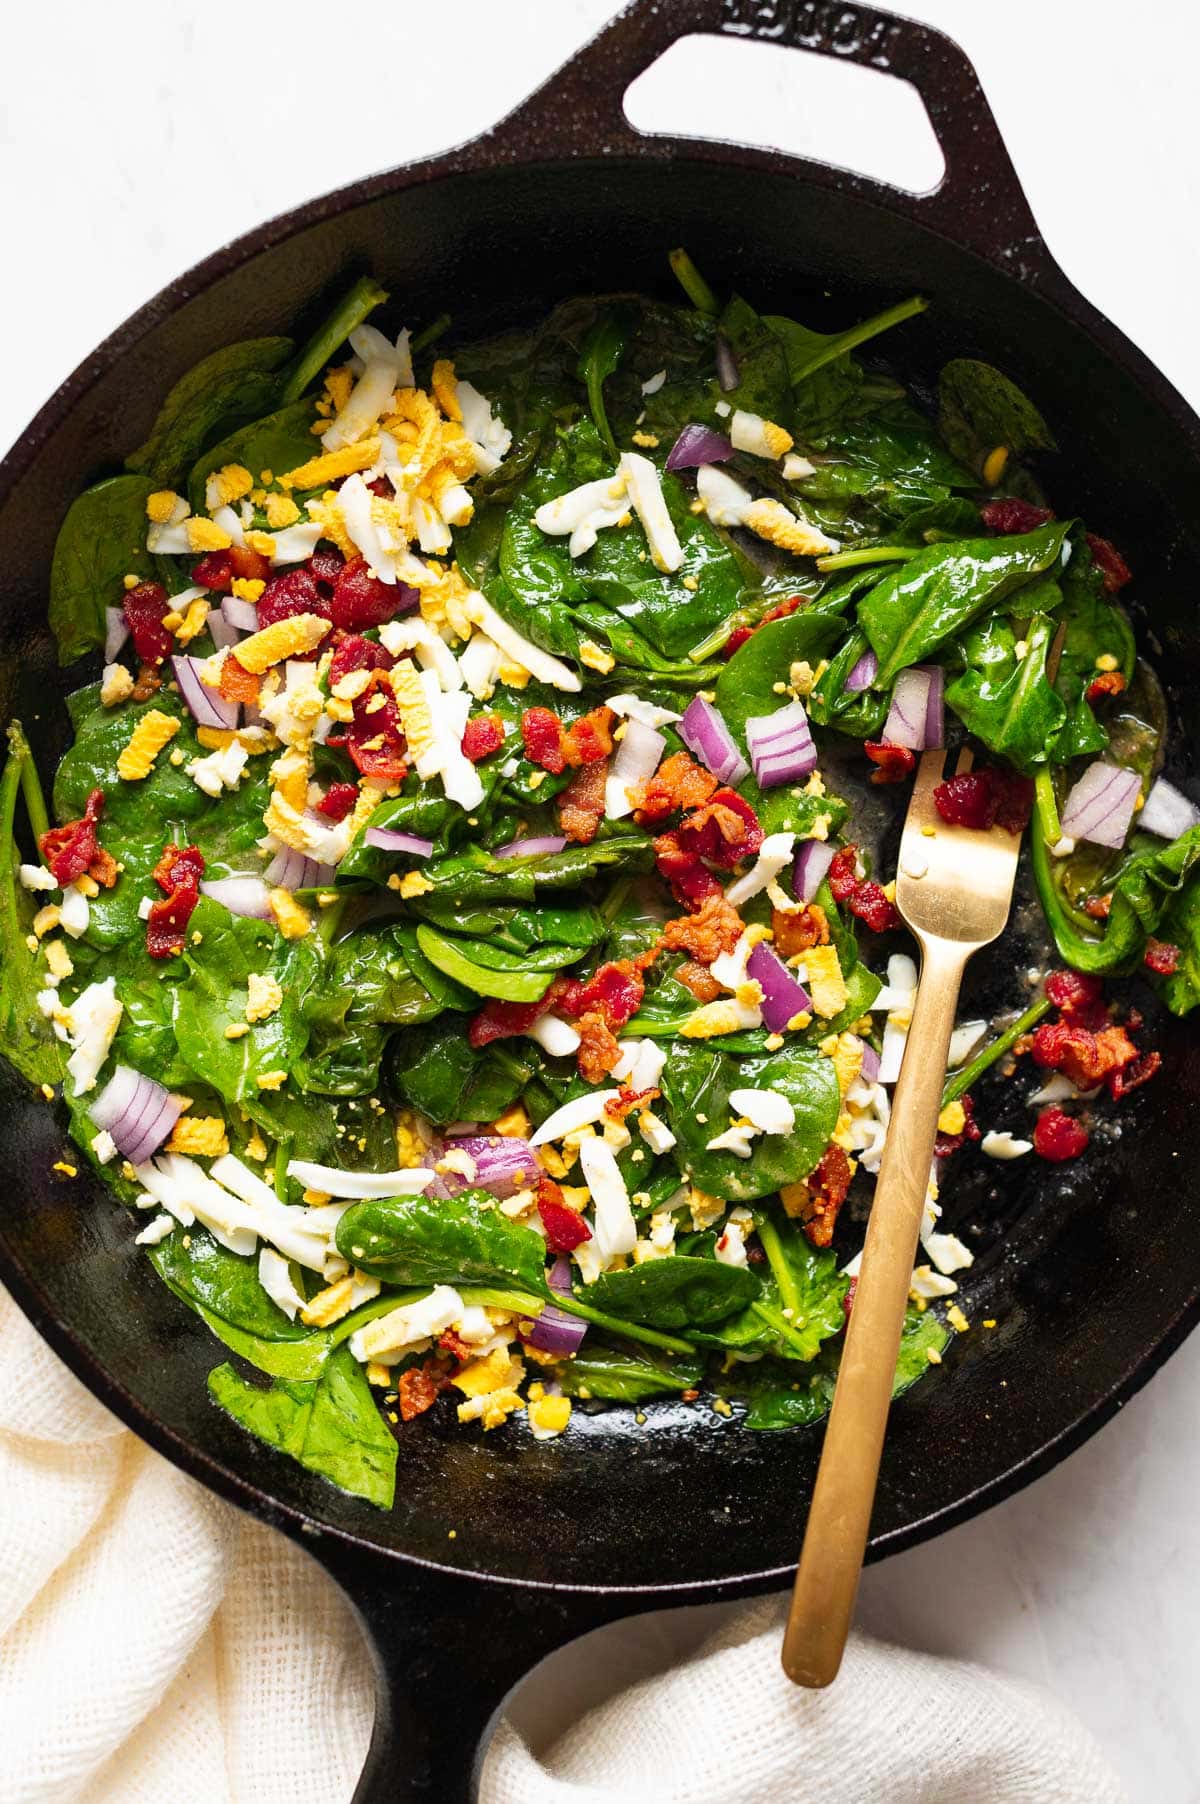 Wilted spinach salad served in a cast iron skillet with a fork.